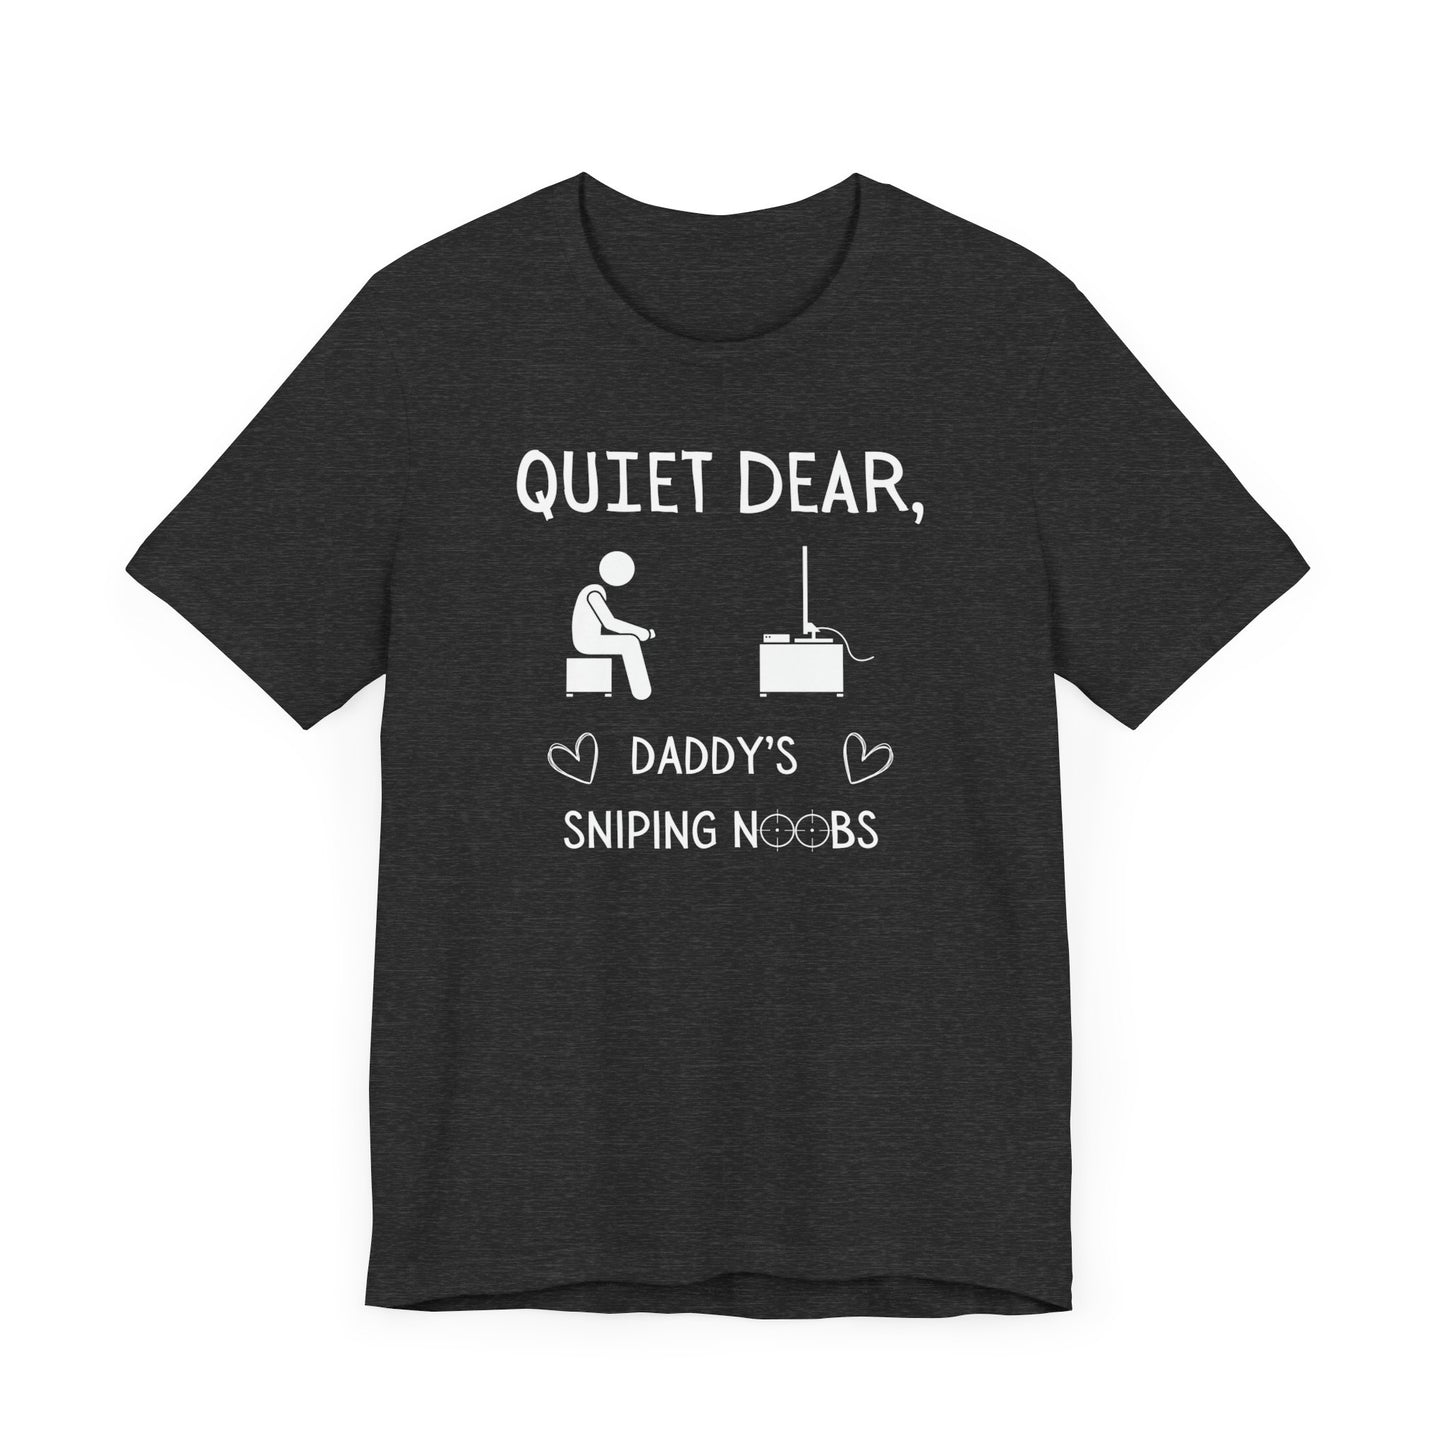 A flat image of a dark gray heather t-shirt that reads Quiet Dear, Daddy's Sniping Noobs in white text. The lower text is framed by two hearts, and the O's are in the shape of sniper scopes. In the center of the shirt is an image of a person holding a controller sitting across from a TV.